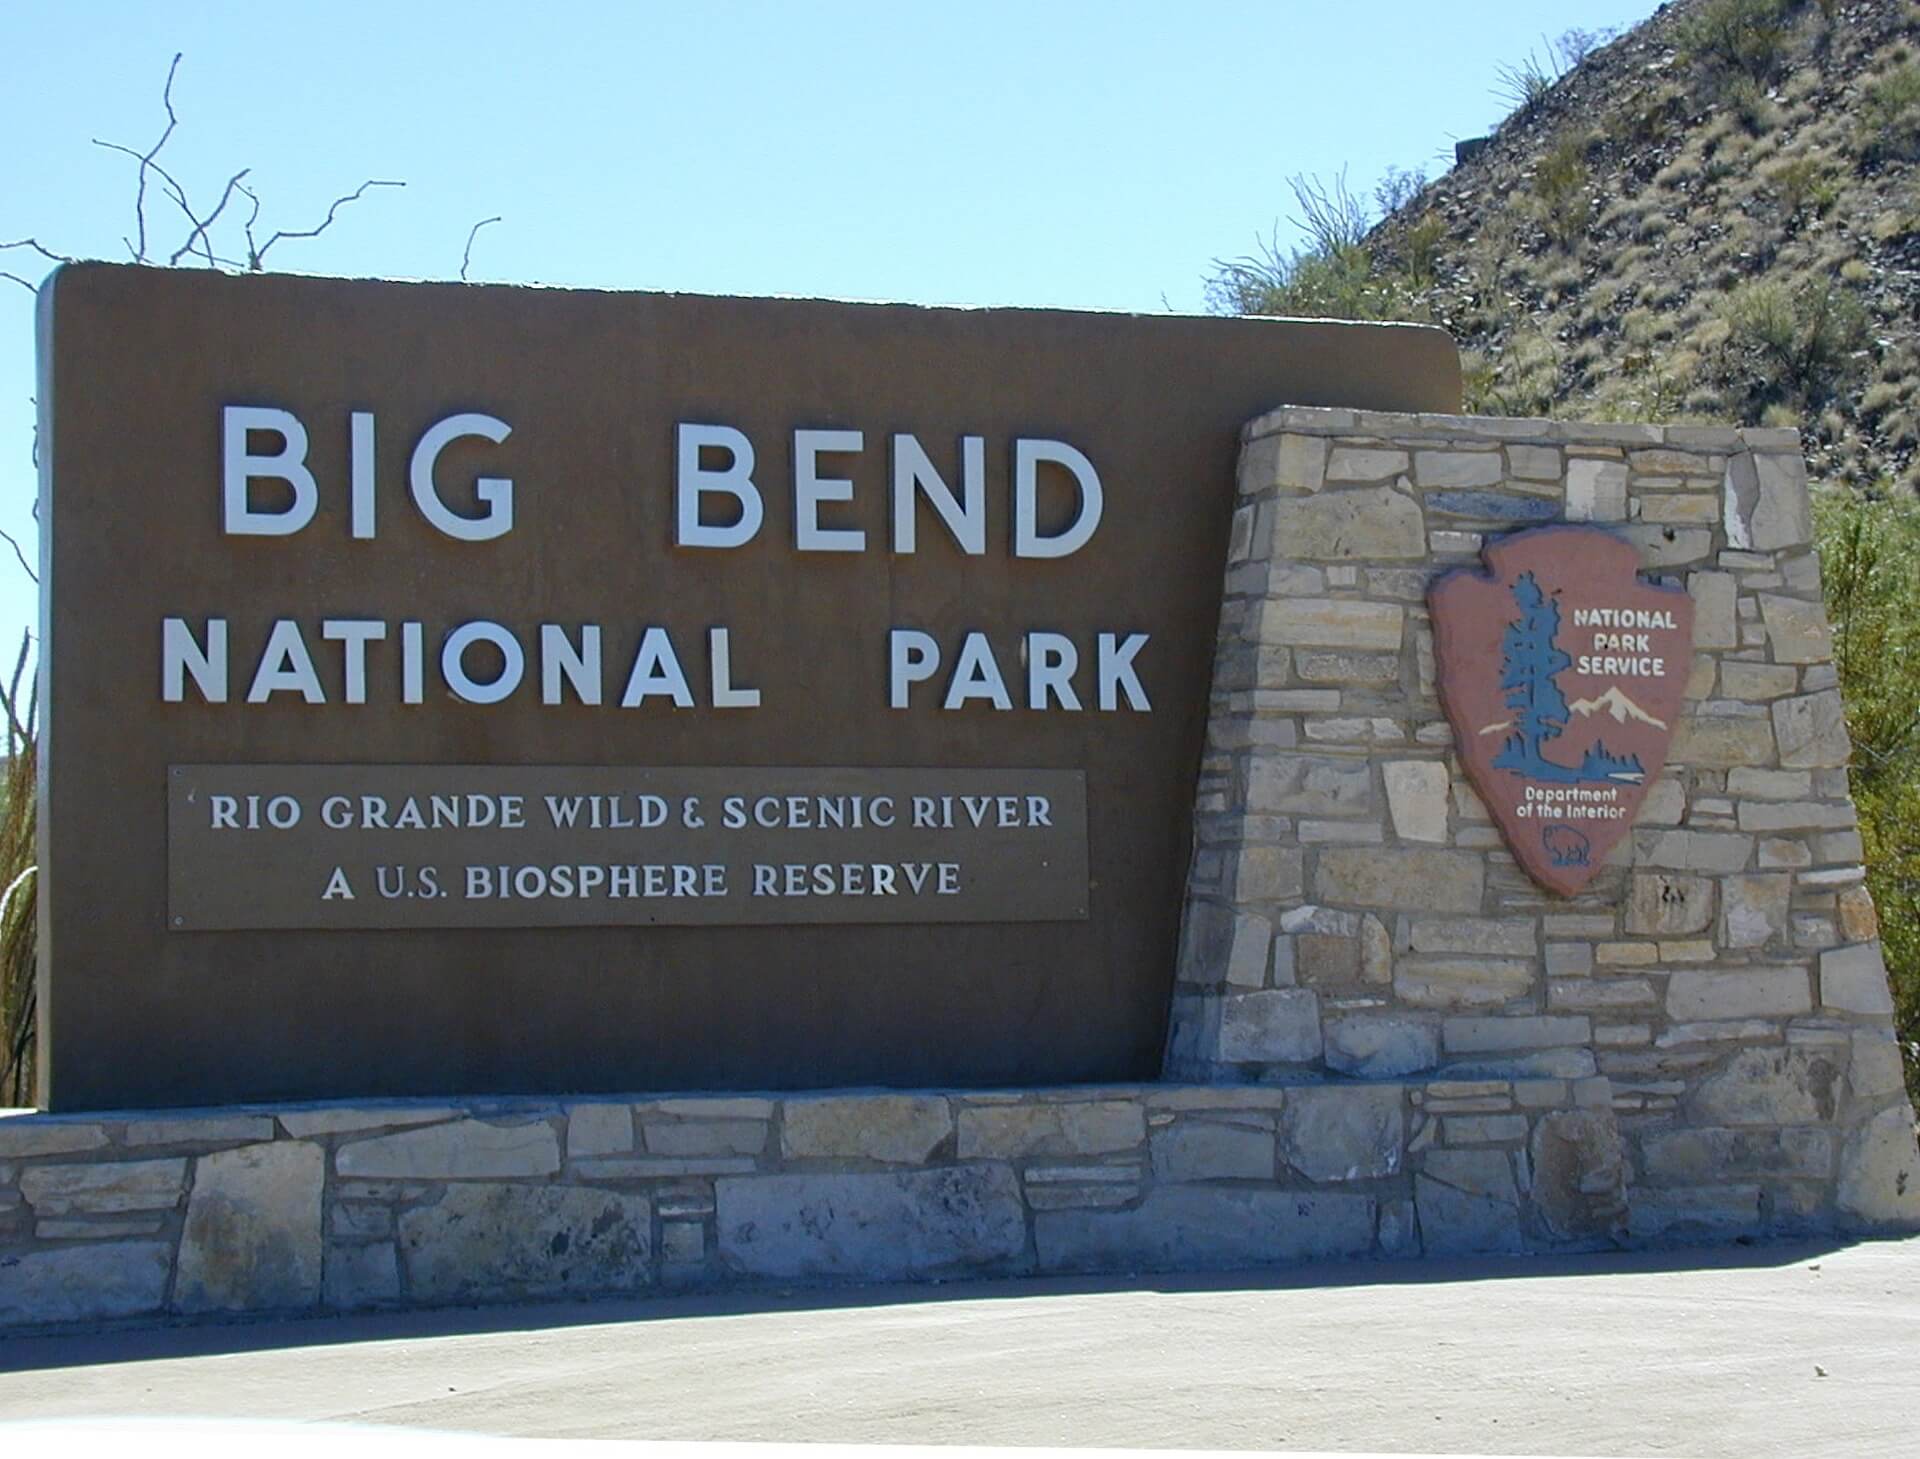 An NPS sign of the Big Bend National Park